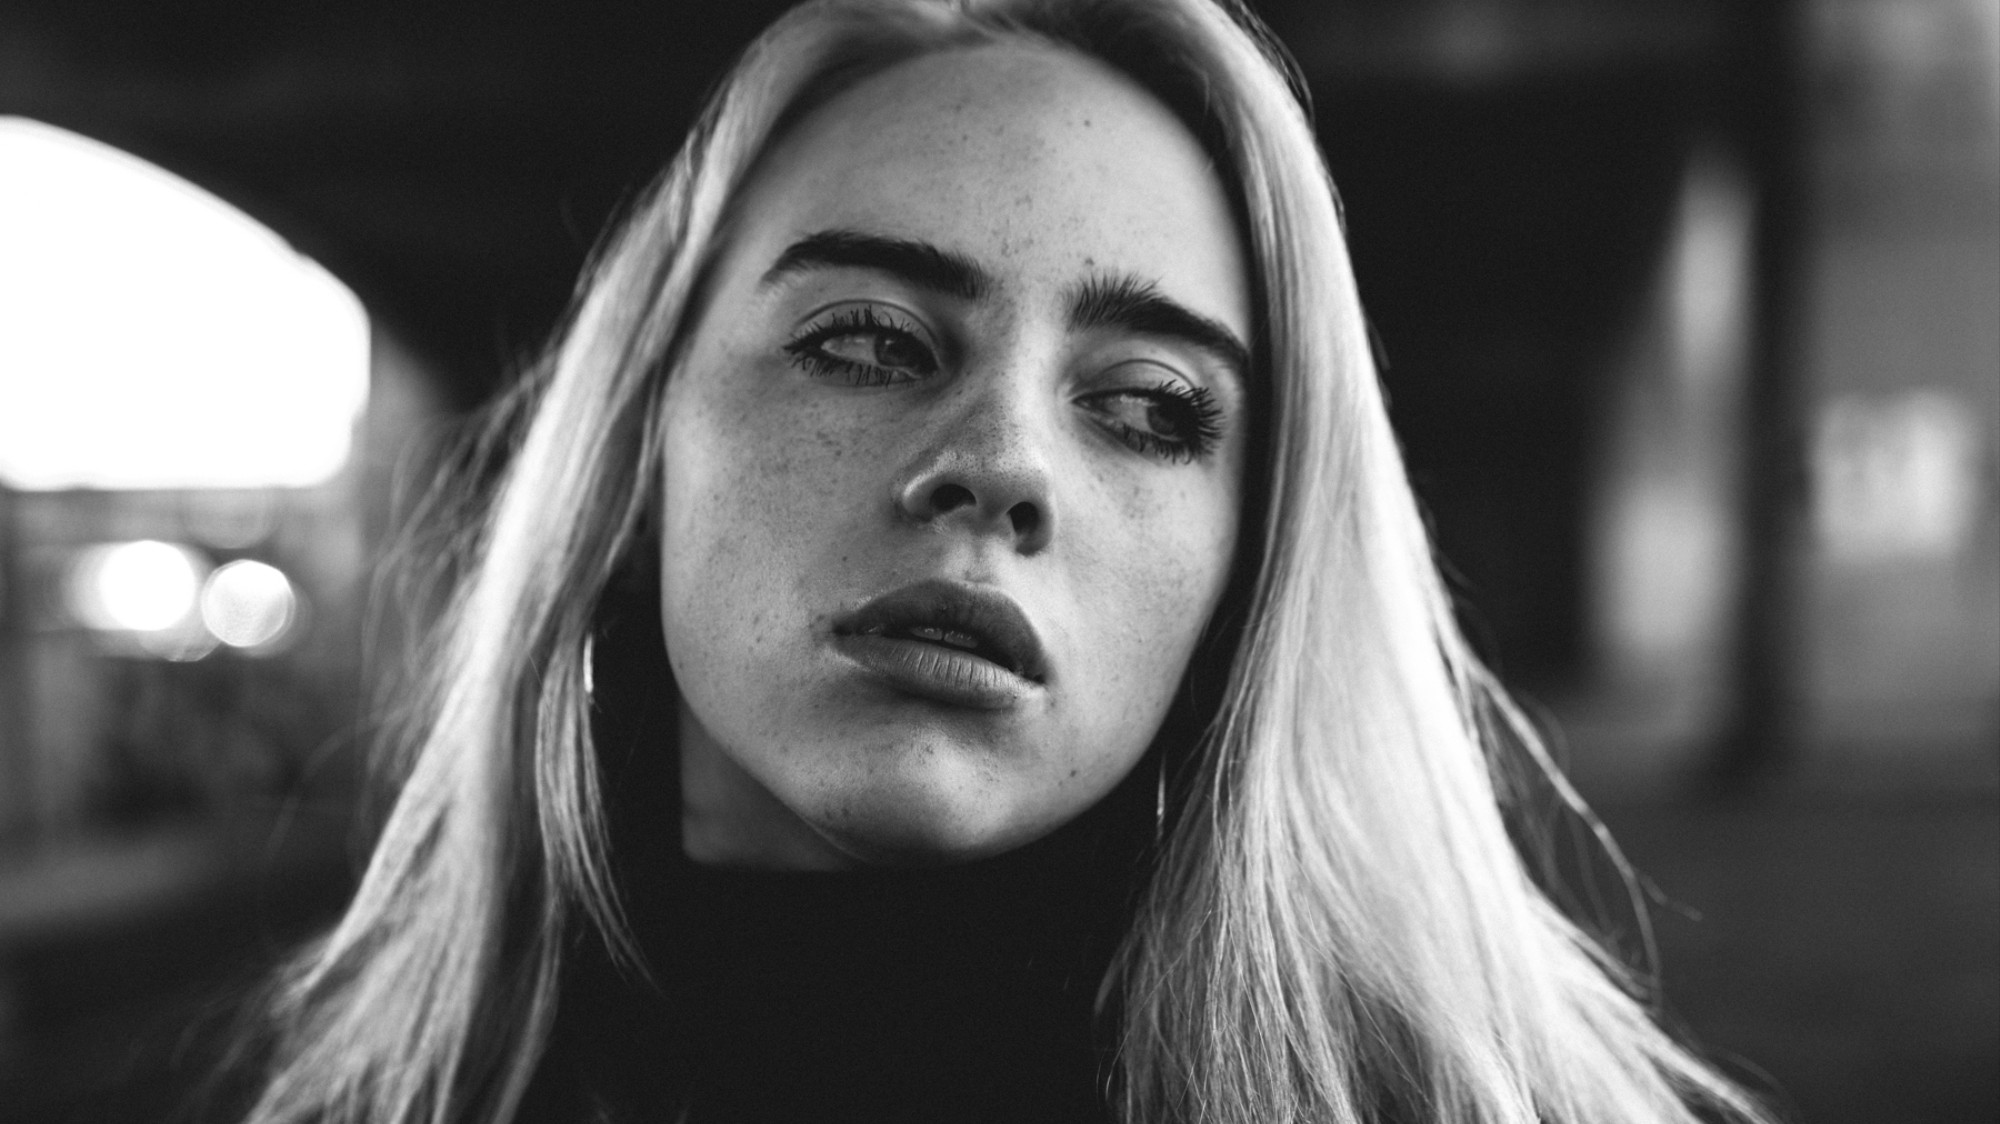 Exclusive 14 Year Old Singer Billie Eilish Returns With A New